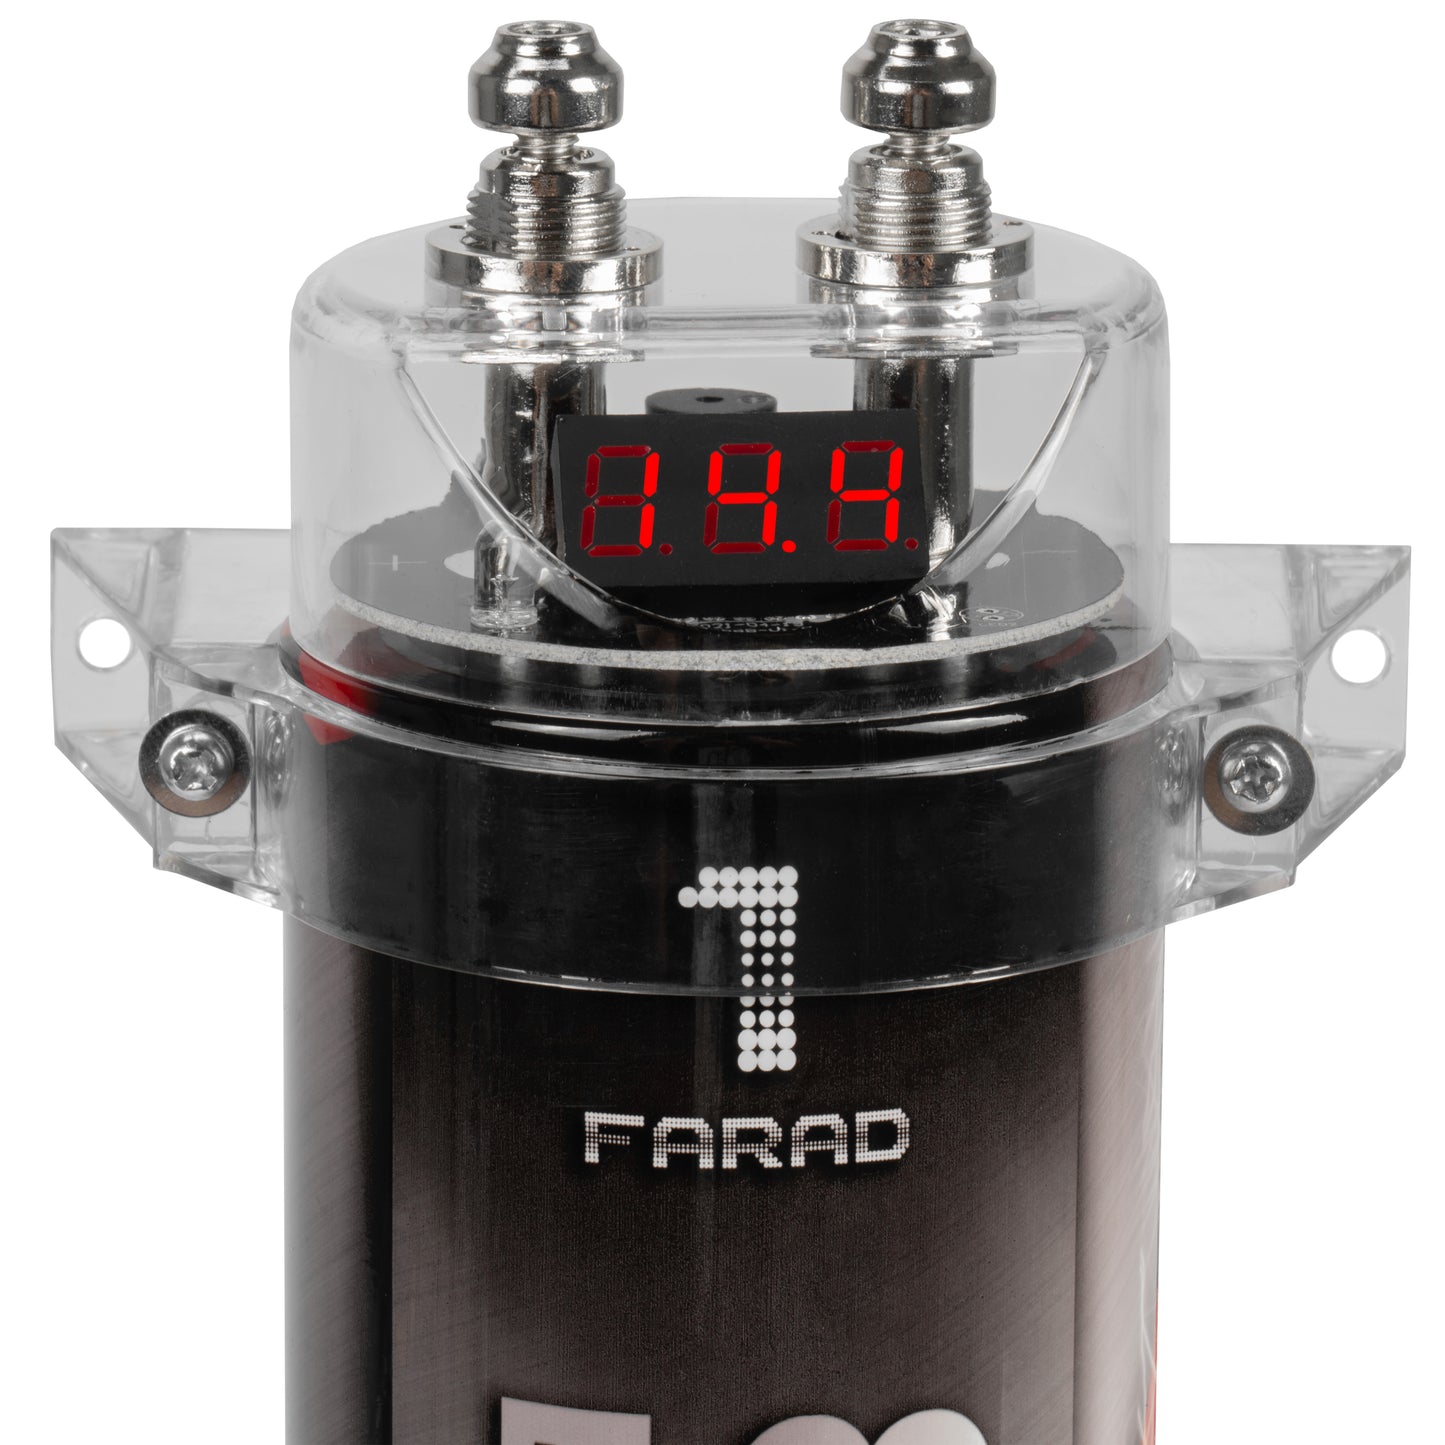 BB1D | 1.0 Farad Capacitor with Red Digital Voltage Display